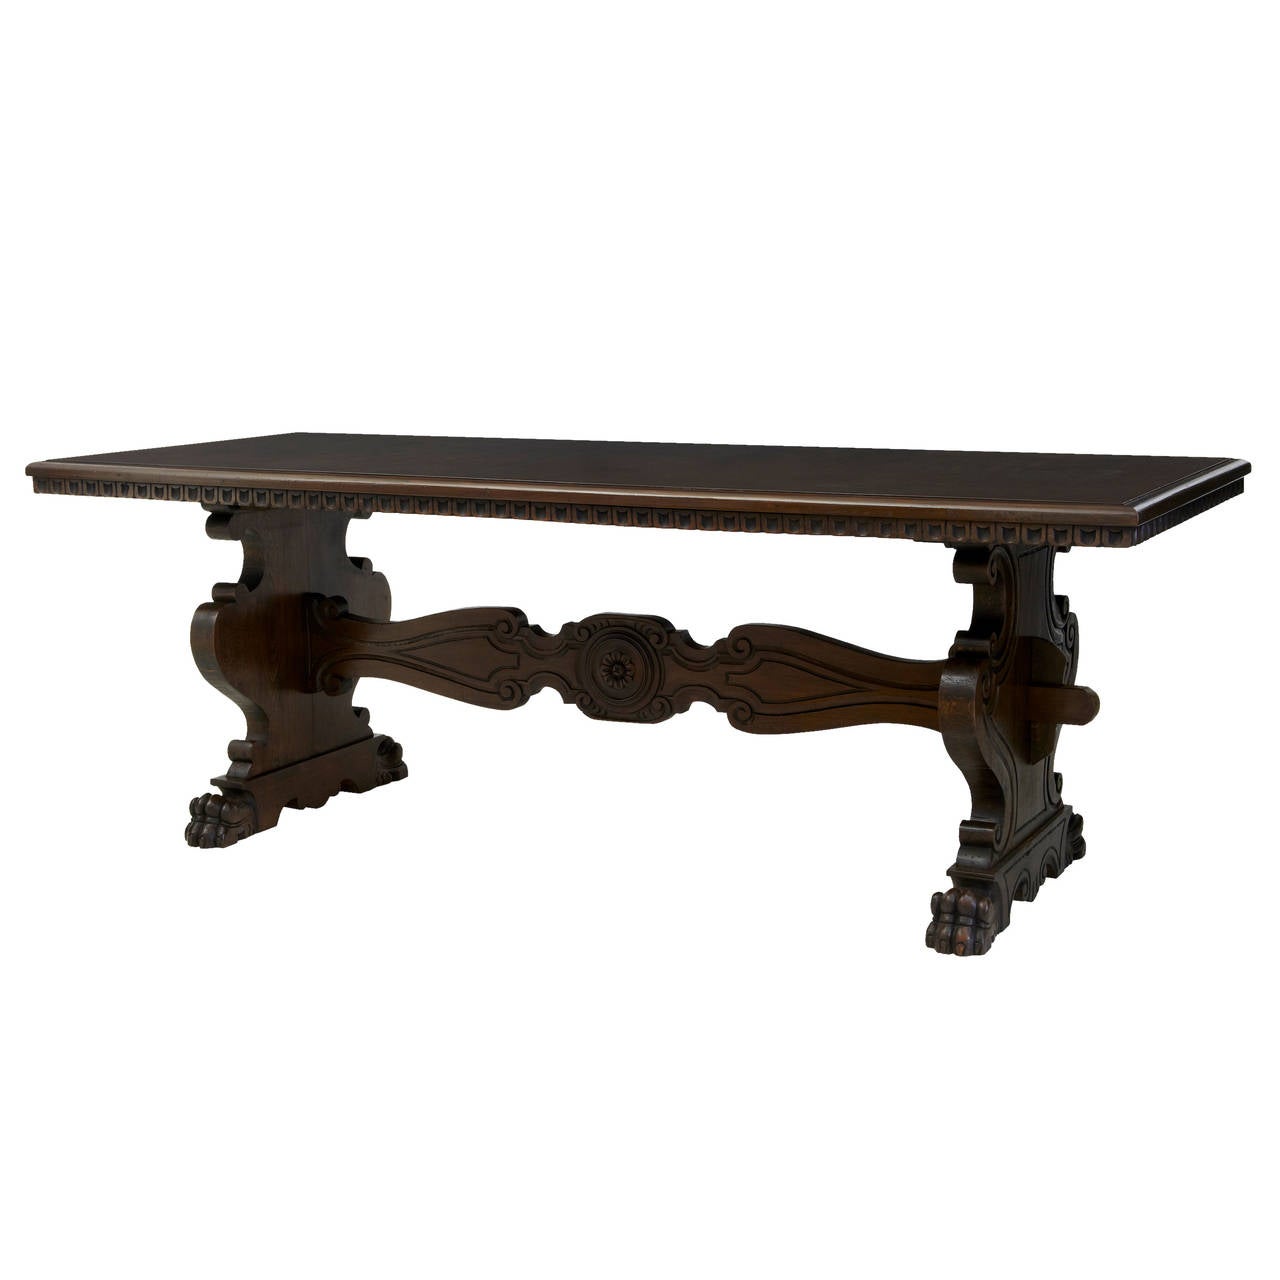 Spanish-style carved-oak refectory table, 1920–29
